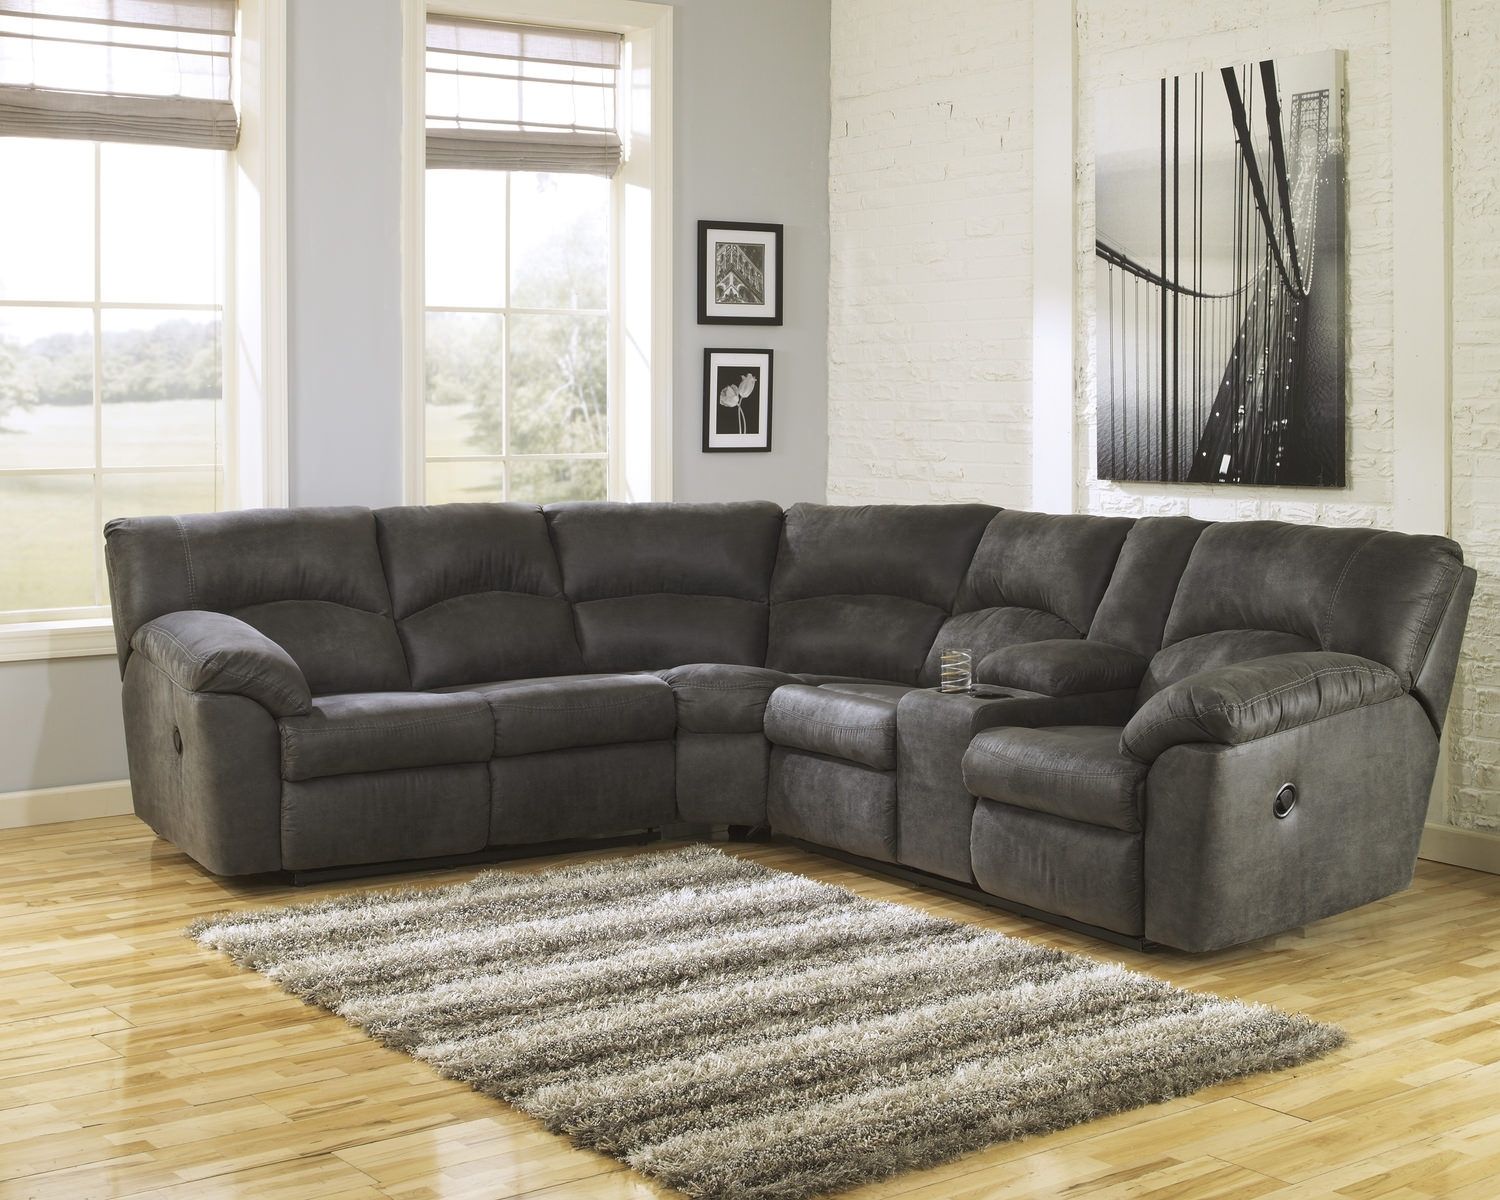 Tambo 2 Piece Reclining Sectional | Dock86 Within Dock 86 Sectional Sofas (View 1 of 10)